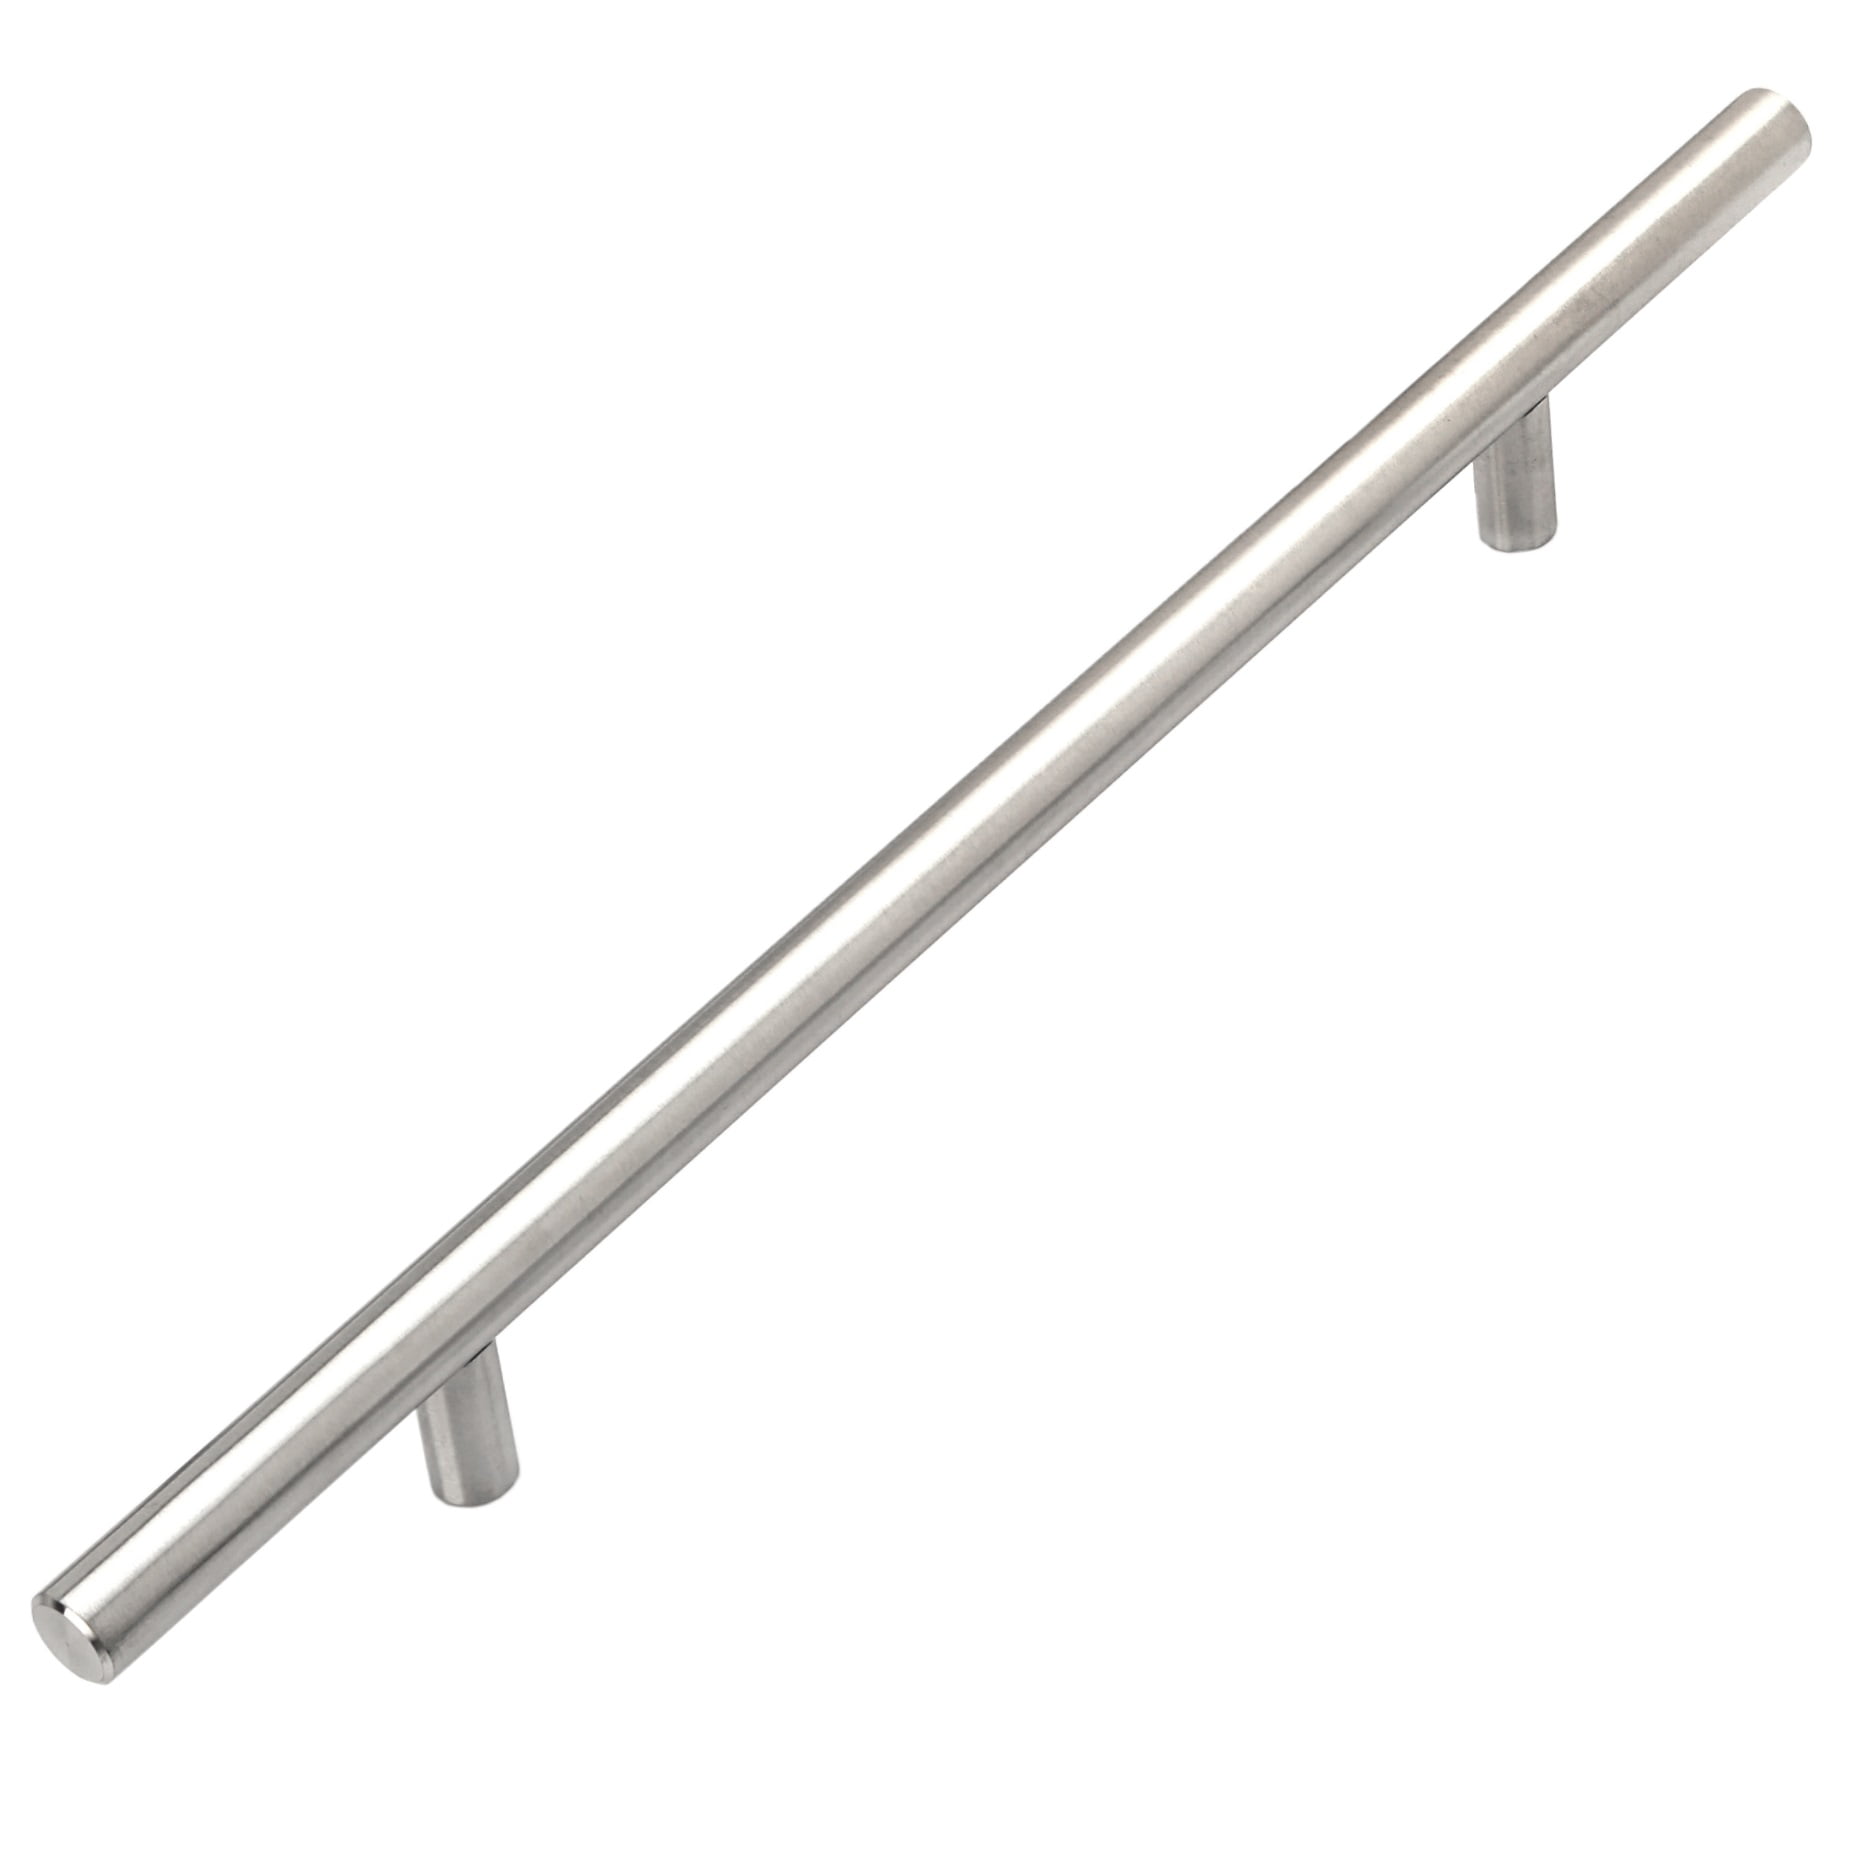 4" 6" 8" 10" 12" Stainless Steel Kitchen Cabinet Drawer Handles T Pull bar 1/2" 